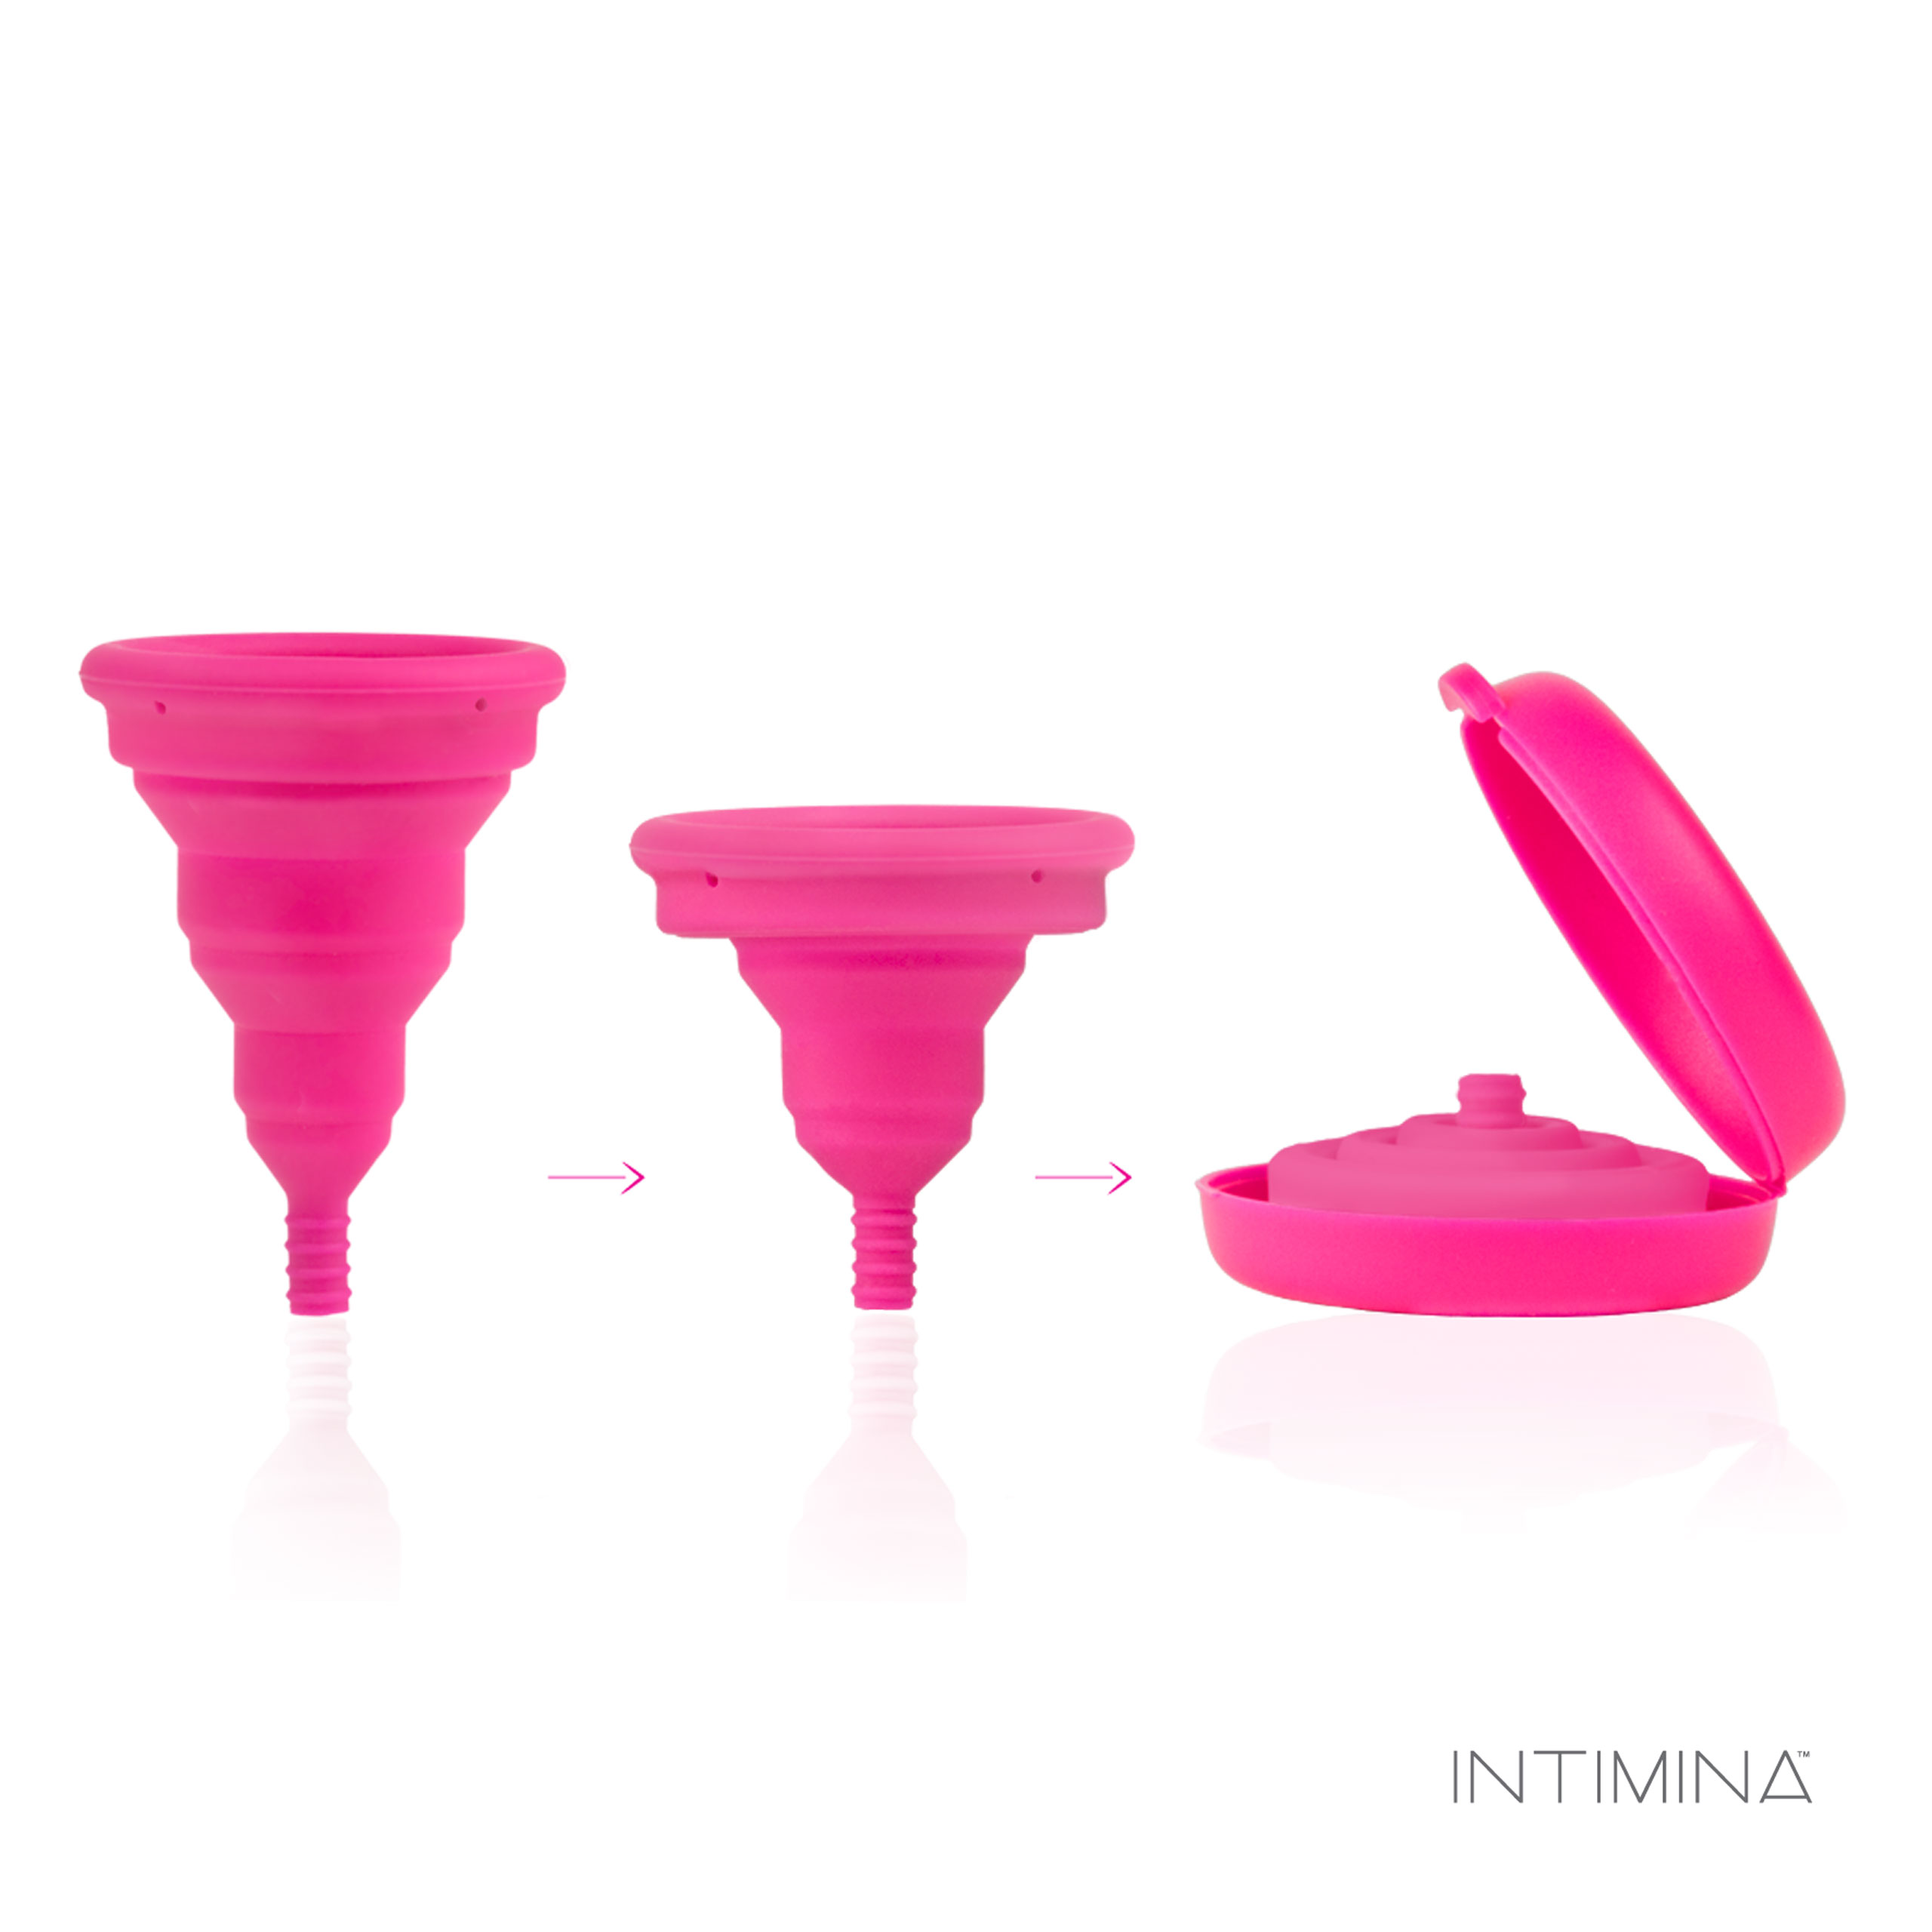 Lily Cup menstrual cup